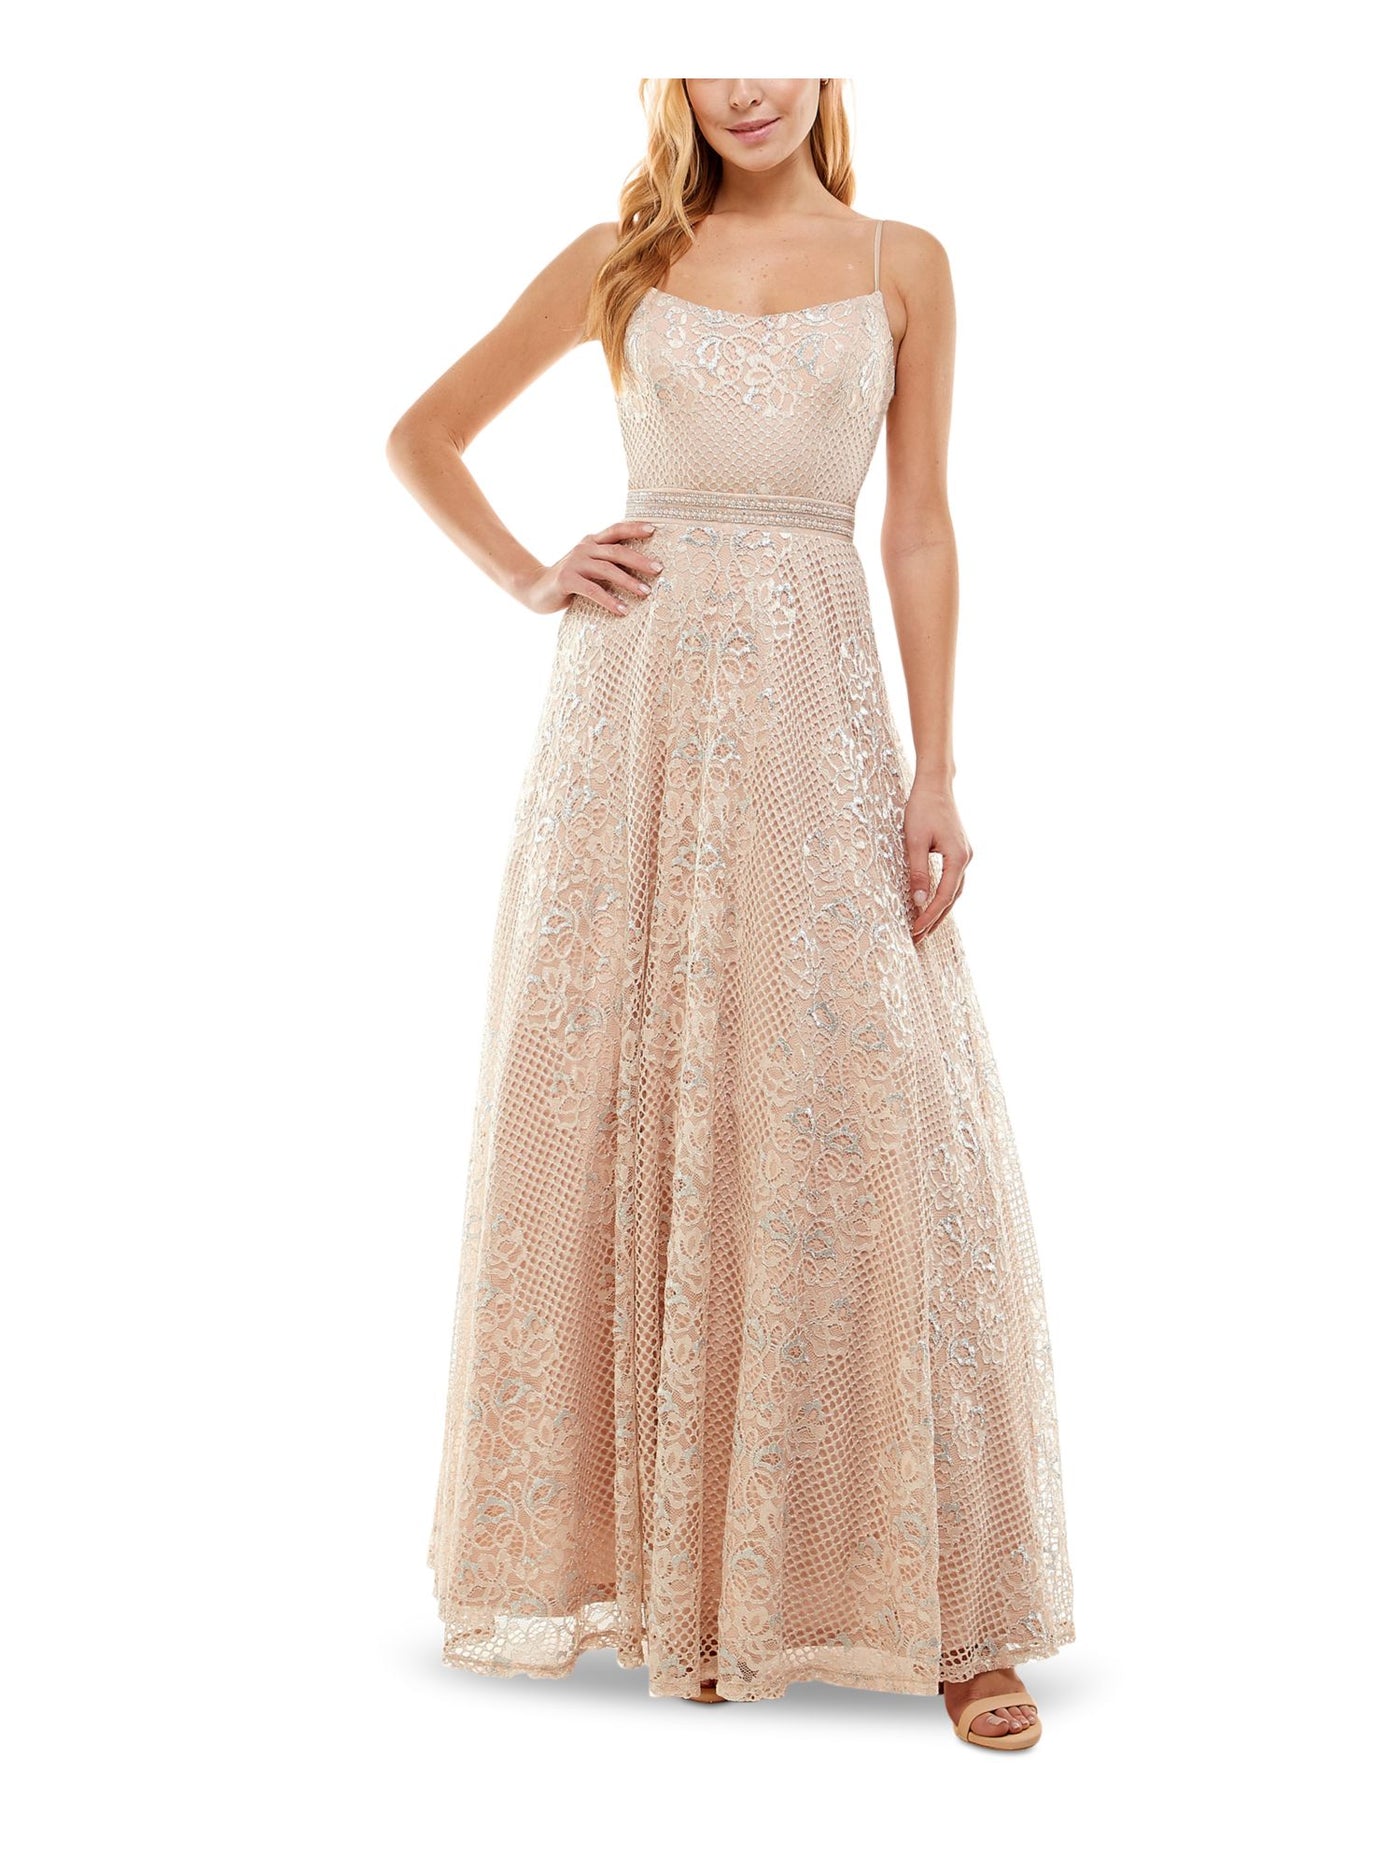 CITY STUDIO Womens Beige Zippered Textured Metallic Lace Overlay Lined Floral Spaghetti Strap Scoop Neck Full-Length Cocktail Gown Dress Juniors 3